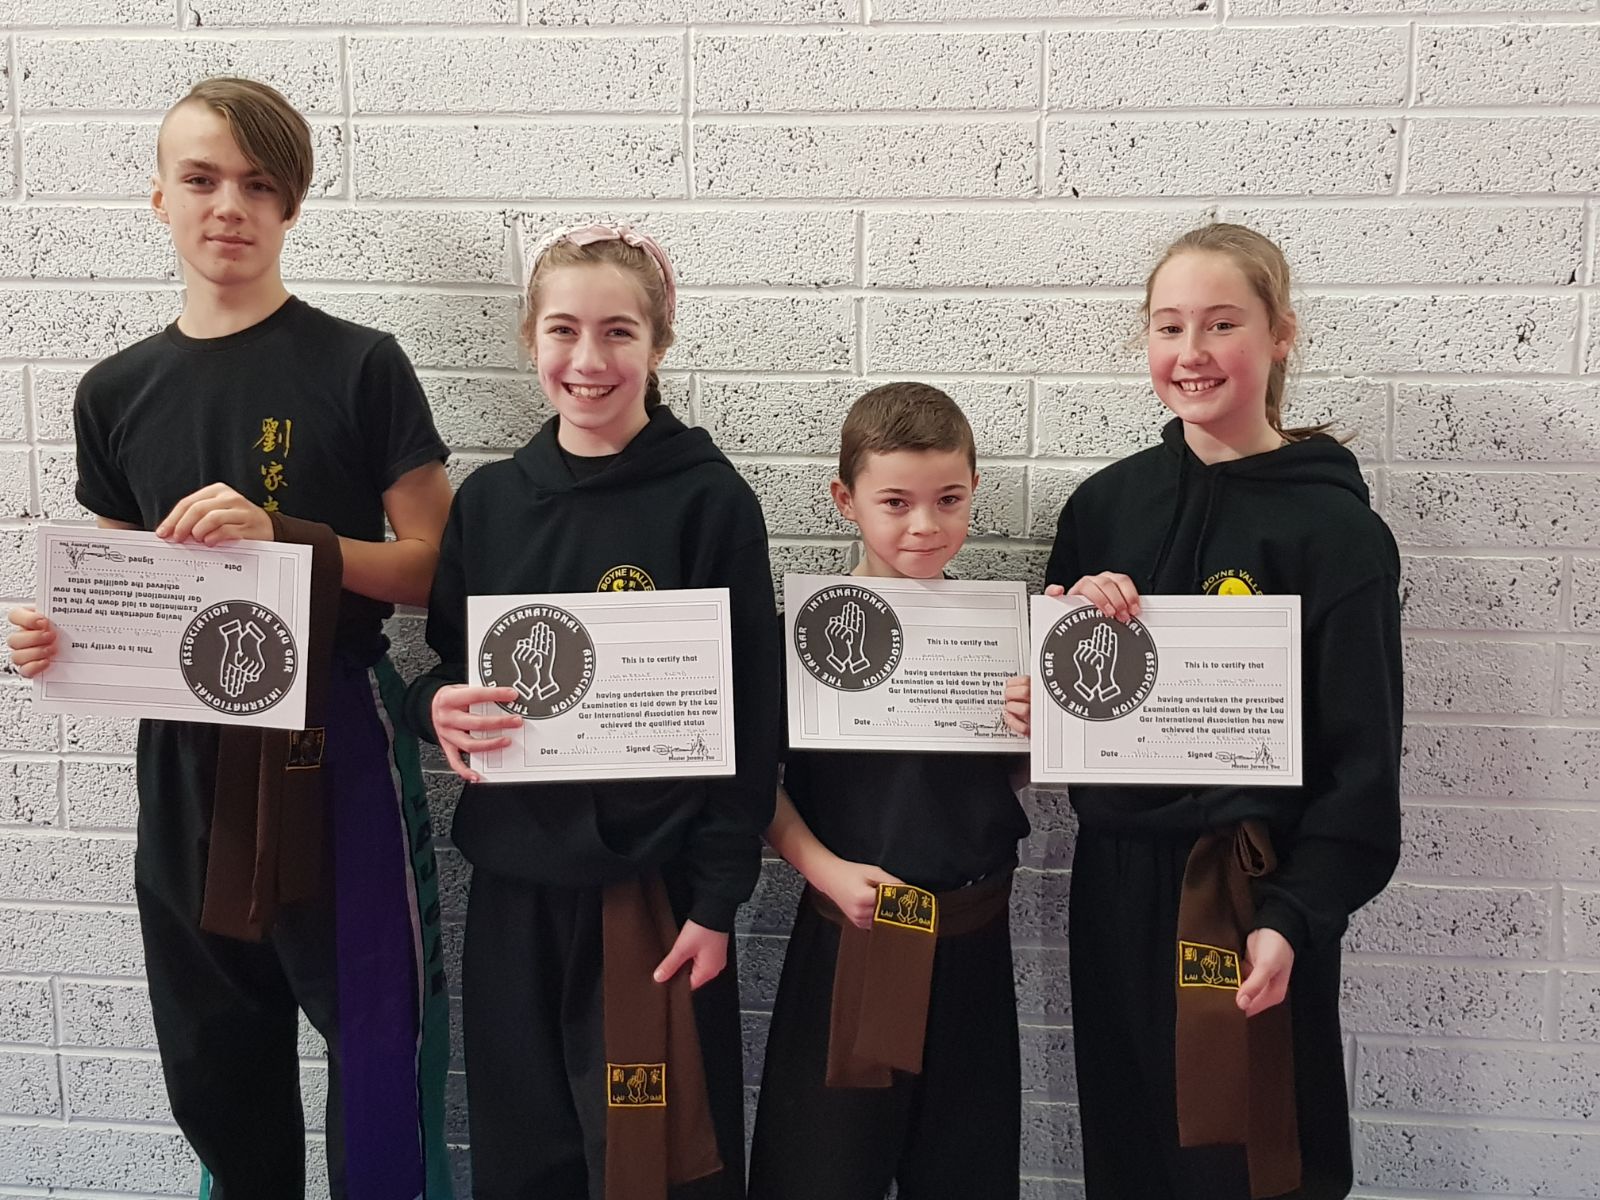 Another four Black Sashes in the making. Congratulations on your Brown Sash grading